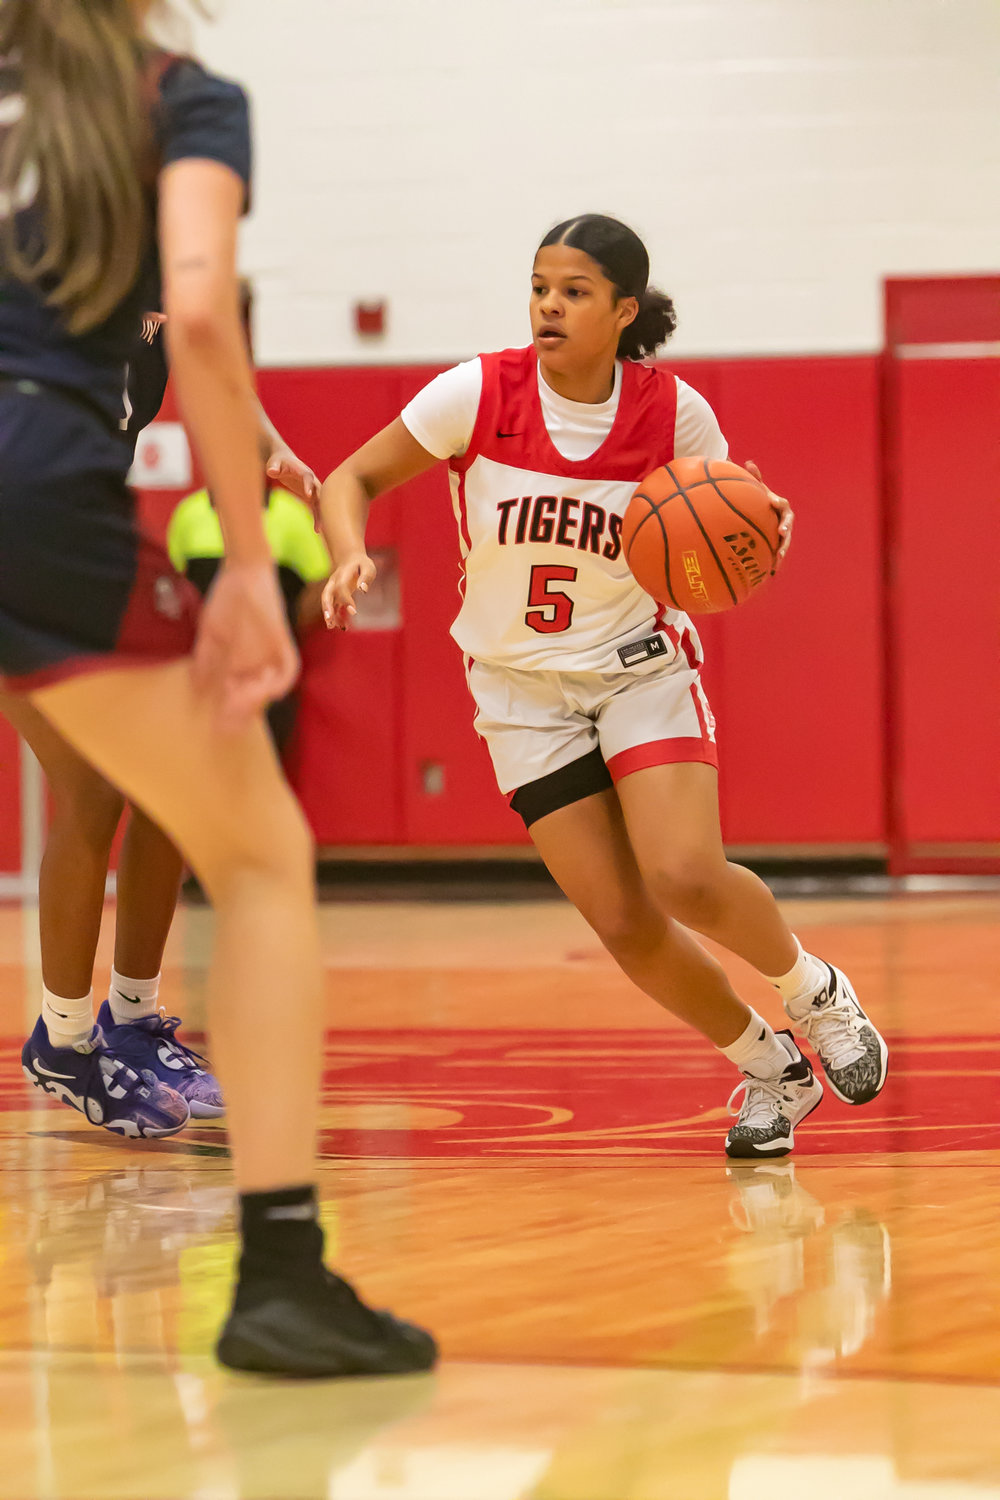 Ashlynn Alexander dribbles the ball up the court during Tuesday's game between Katy and Tompkins at the Katy gym.